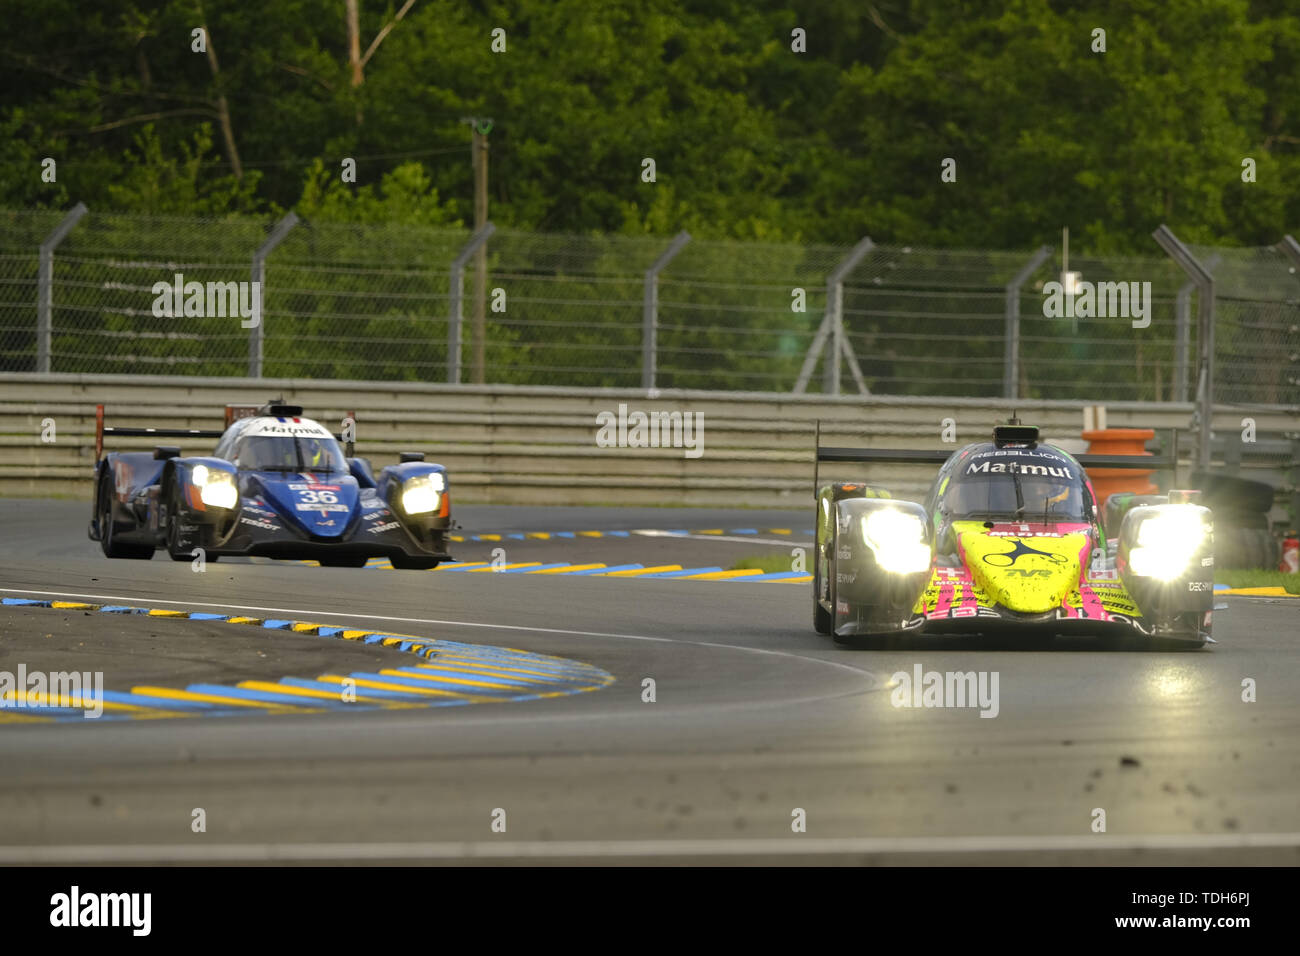 Le Mans, Sarthe, France. 16th June, 2019. Rebellion Racing Rebellion R13 Gibson rider NEEL JANI (CHE) in action during the 87th edition of the 24 hours of Le Mans the last round of the FIA World Endurance Championship at the Sarthe circuit at Le Mans - France Credit: Pierre Stevenin/ZUMA Wire/Alamy Live News Stock Photo